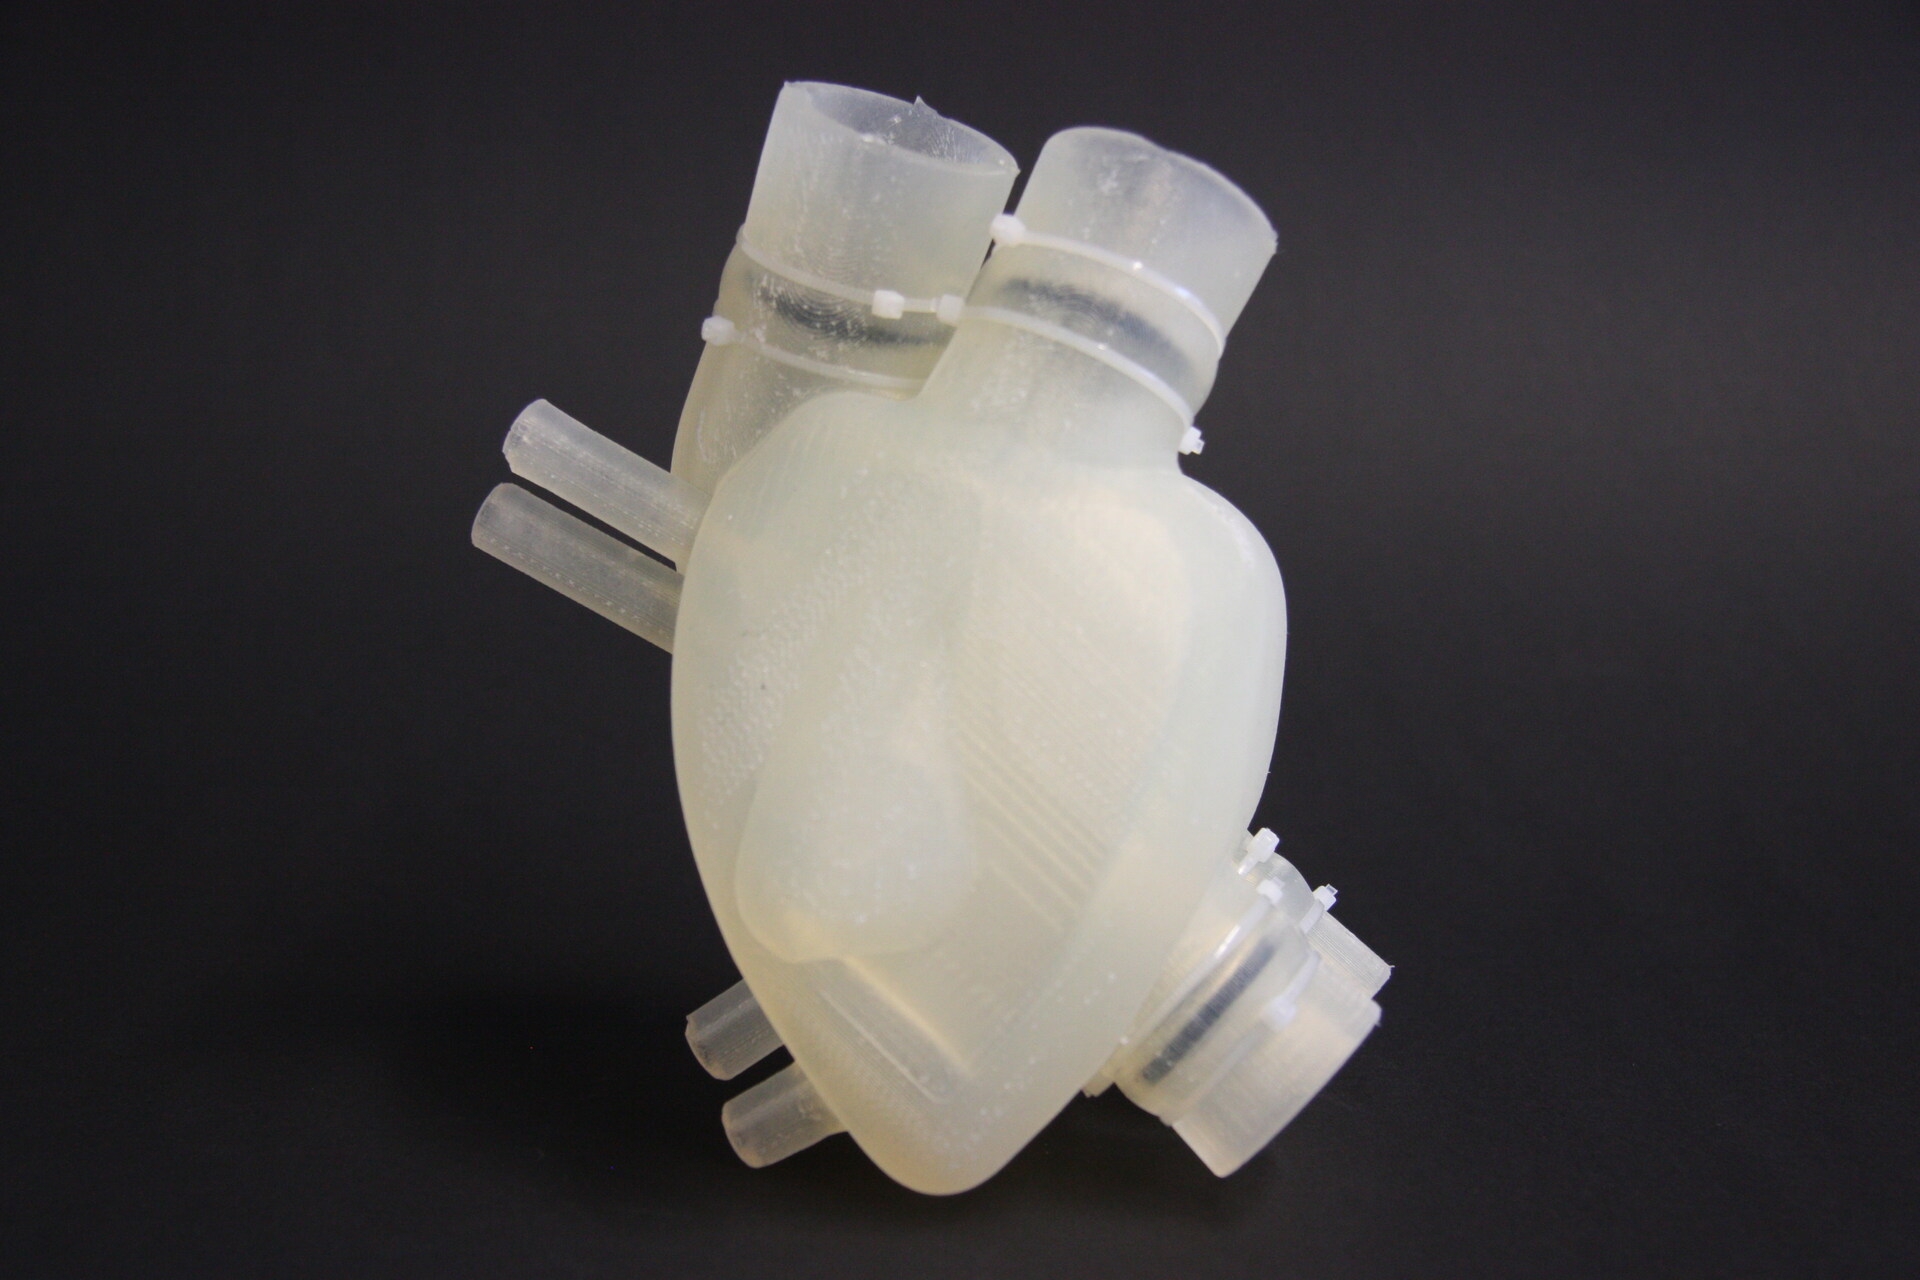 Gino Gerosa: interview with the surgeon from the University of Padua who will coordinate doctors, engineers, biologists and materials experts with a 50 million euro budget to create the first Italian artificial heart